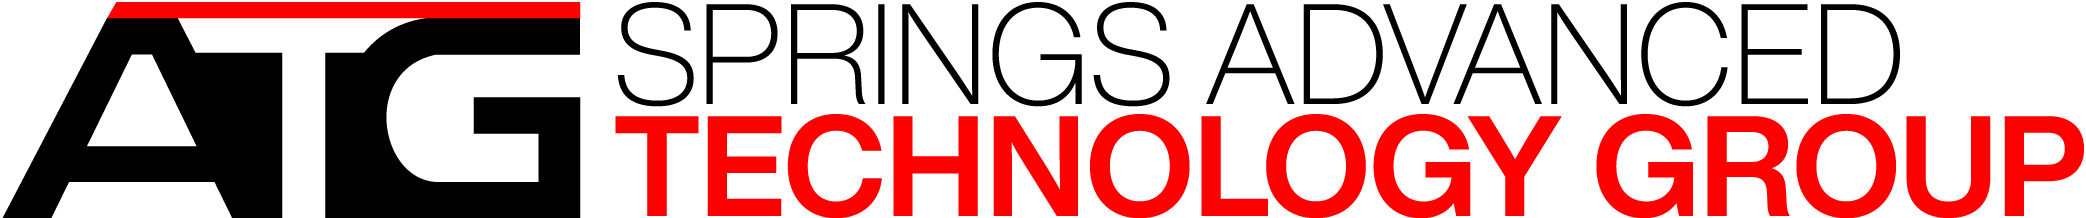 Springs Advanced Technology Group